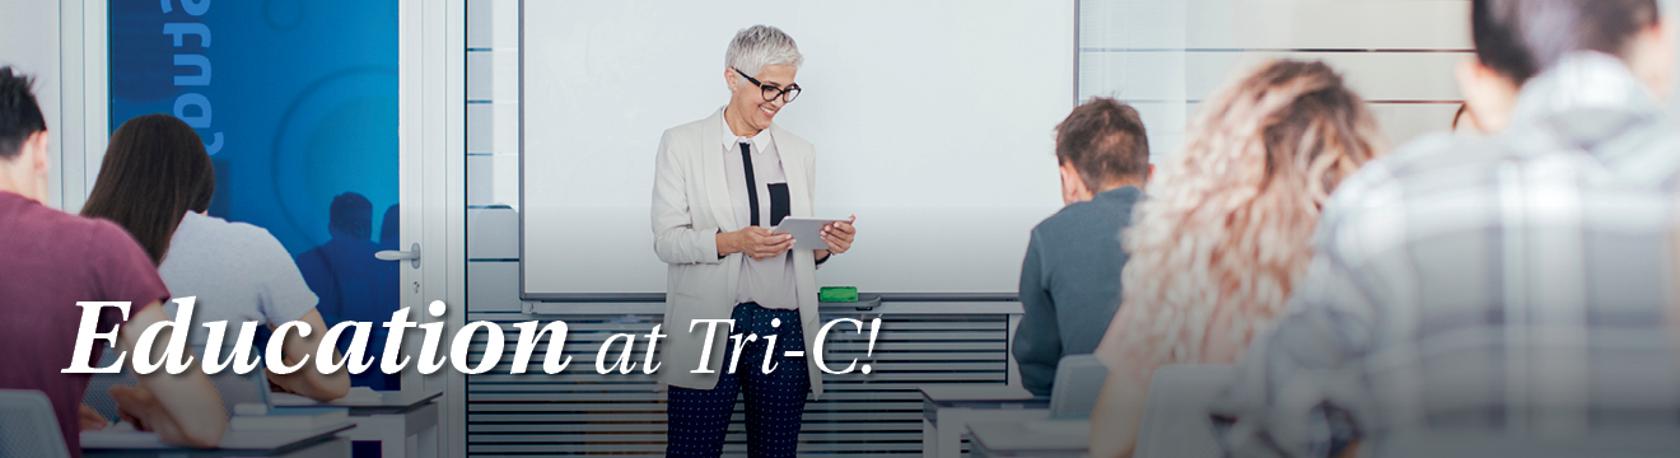 "Education at Tri-C!" with image of instructor in front of a class